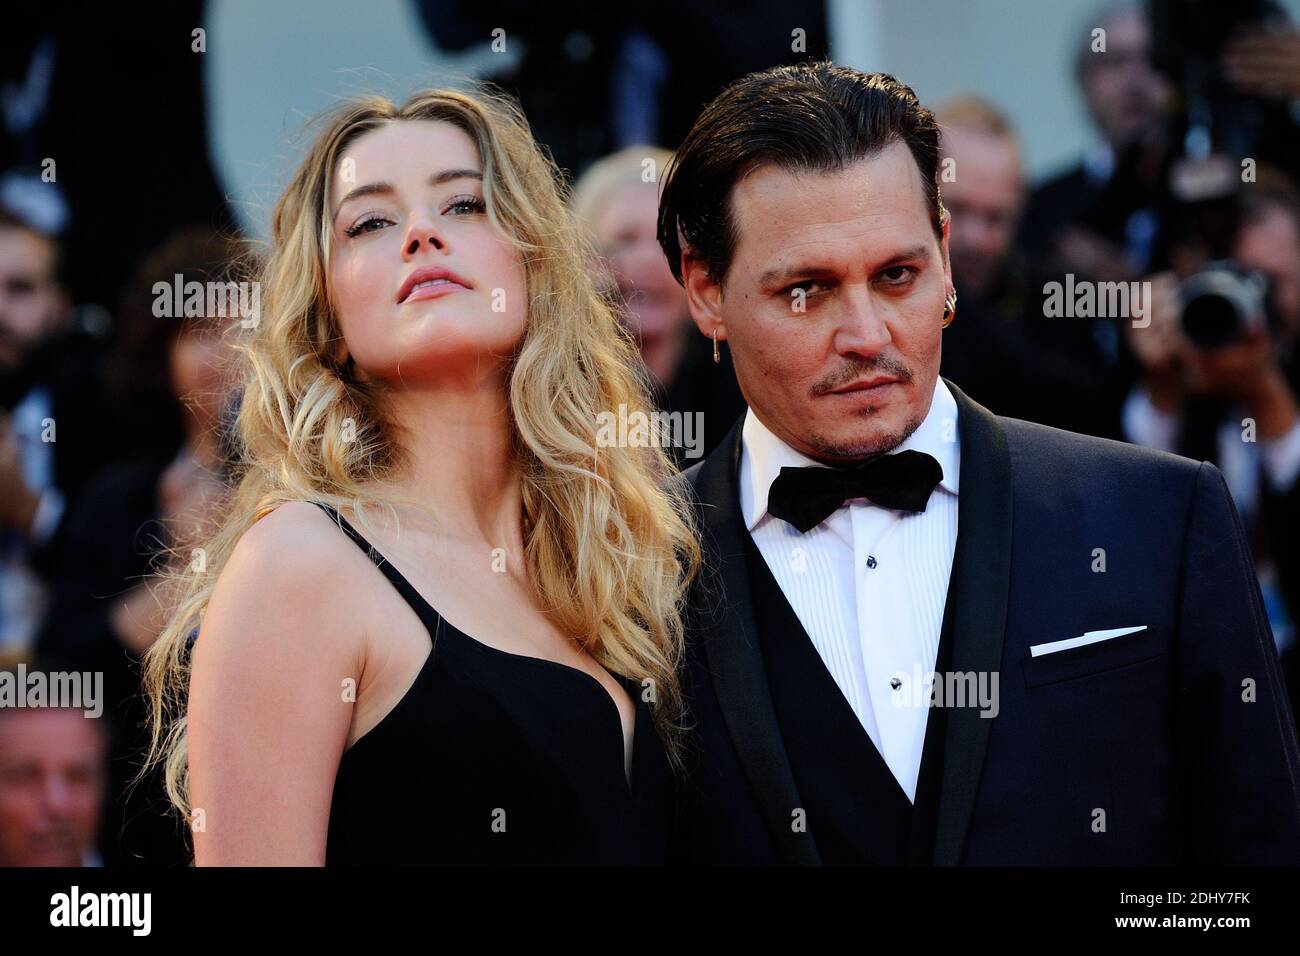 File photo : File photo : Amber Heard and Johnny Depp attending the 'Black Mass' Premiere during the 72nd Venice International Film Festival (Mostra) on the Lido in Venice, Italy on September 04, 2015. Actor Johnny Depp and his wife Amber Heard are divorcing after 15 months of marriage. Amber, 30, cited irreconcilable differences and is seeking spousal support from the Pirates Of The Caribbean star, according to court records. The pair, who do not have children together, married in February last year after co-starring in the 2011 film The Rum Diary. Johnny Depp’s lavish spending led him to bri Stock Photo